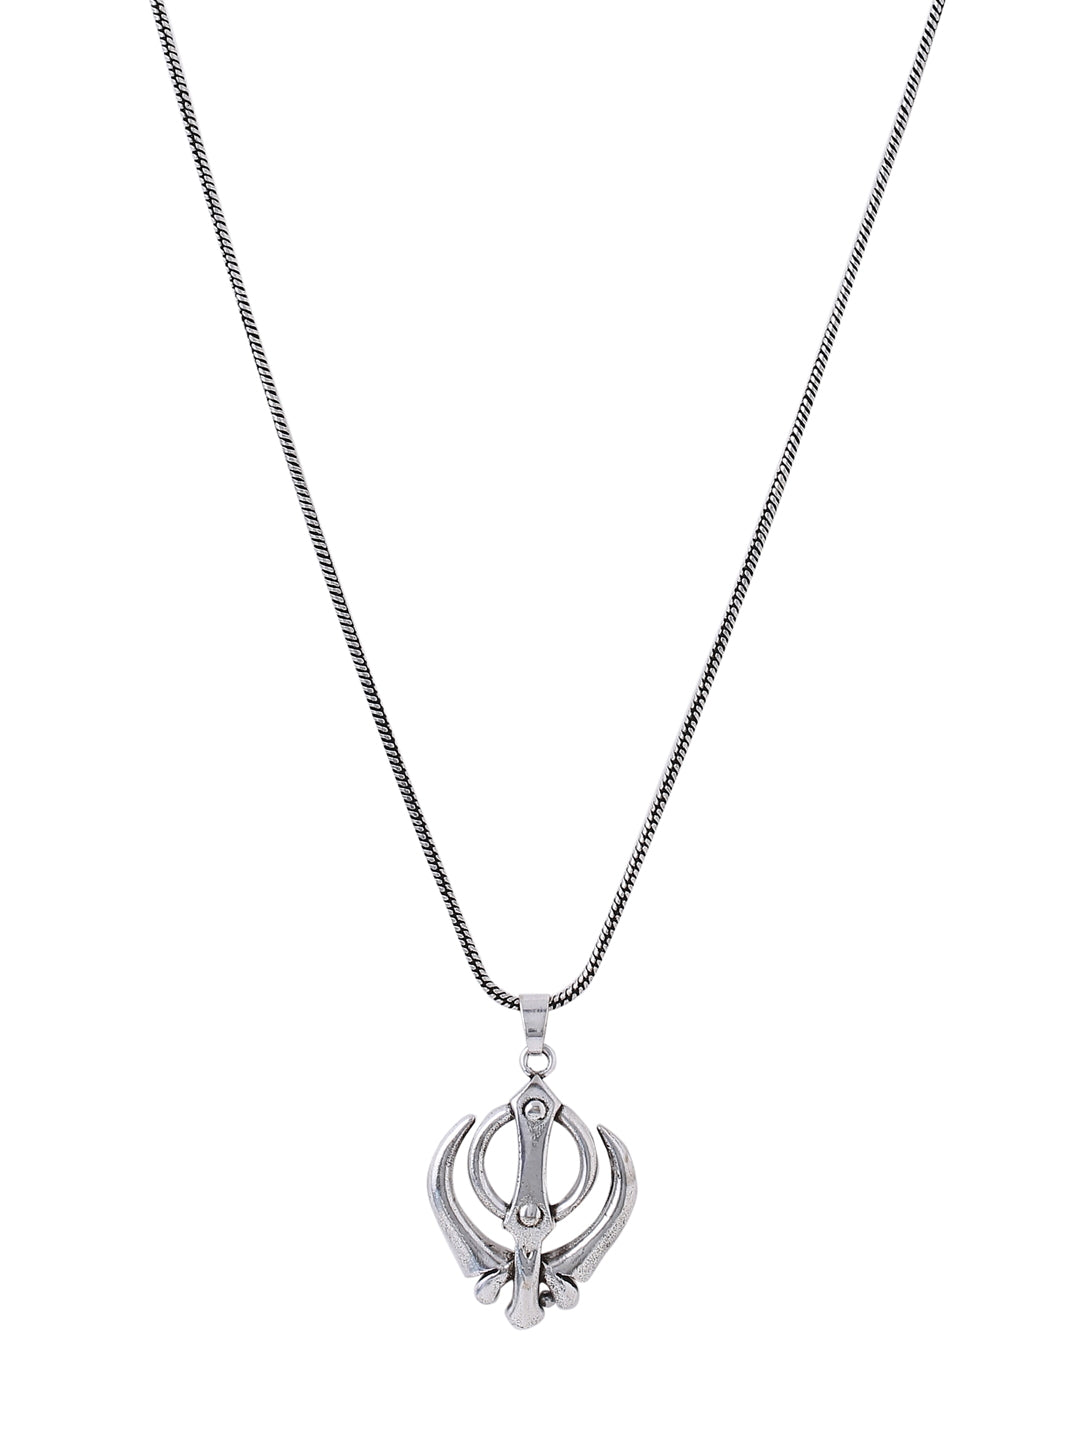 Antique Silve Plated Khanda Pendant with Chain-Viraasi